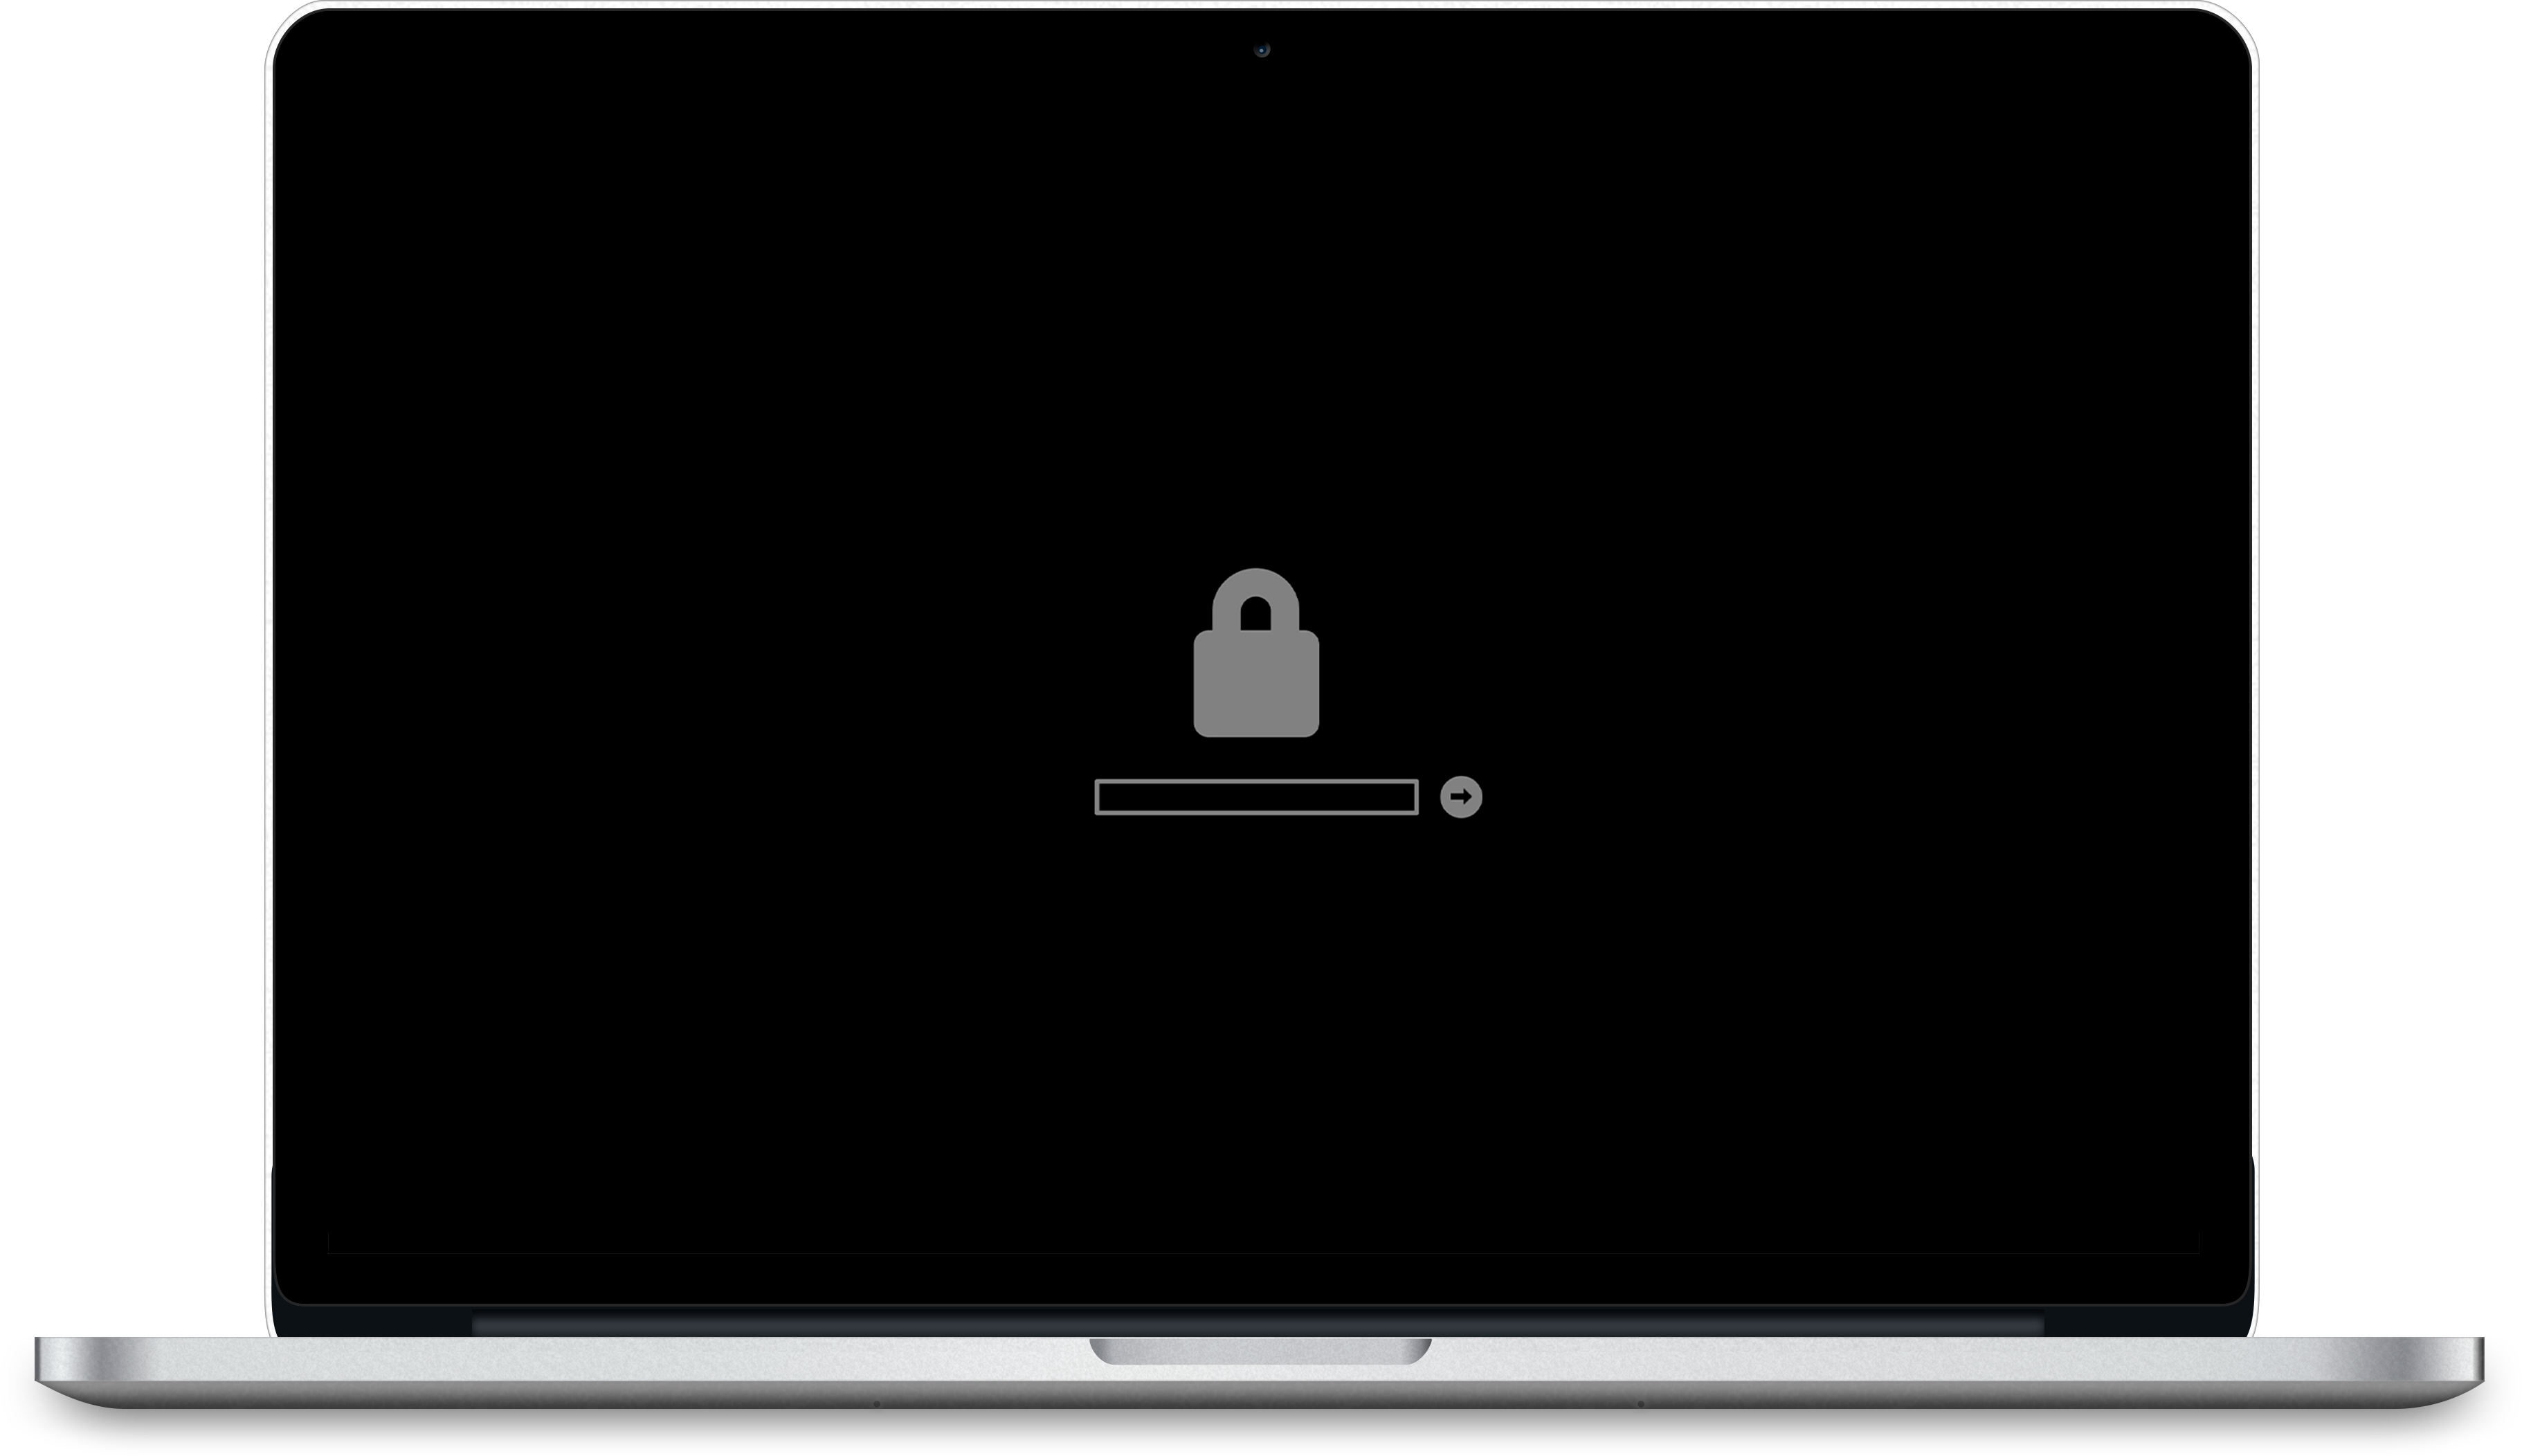 How to bypass EFI firmware passcode or System PIN Lock with out passcode on Mojave